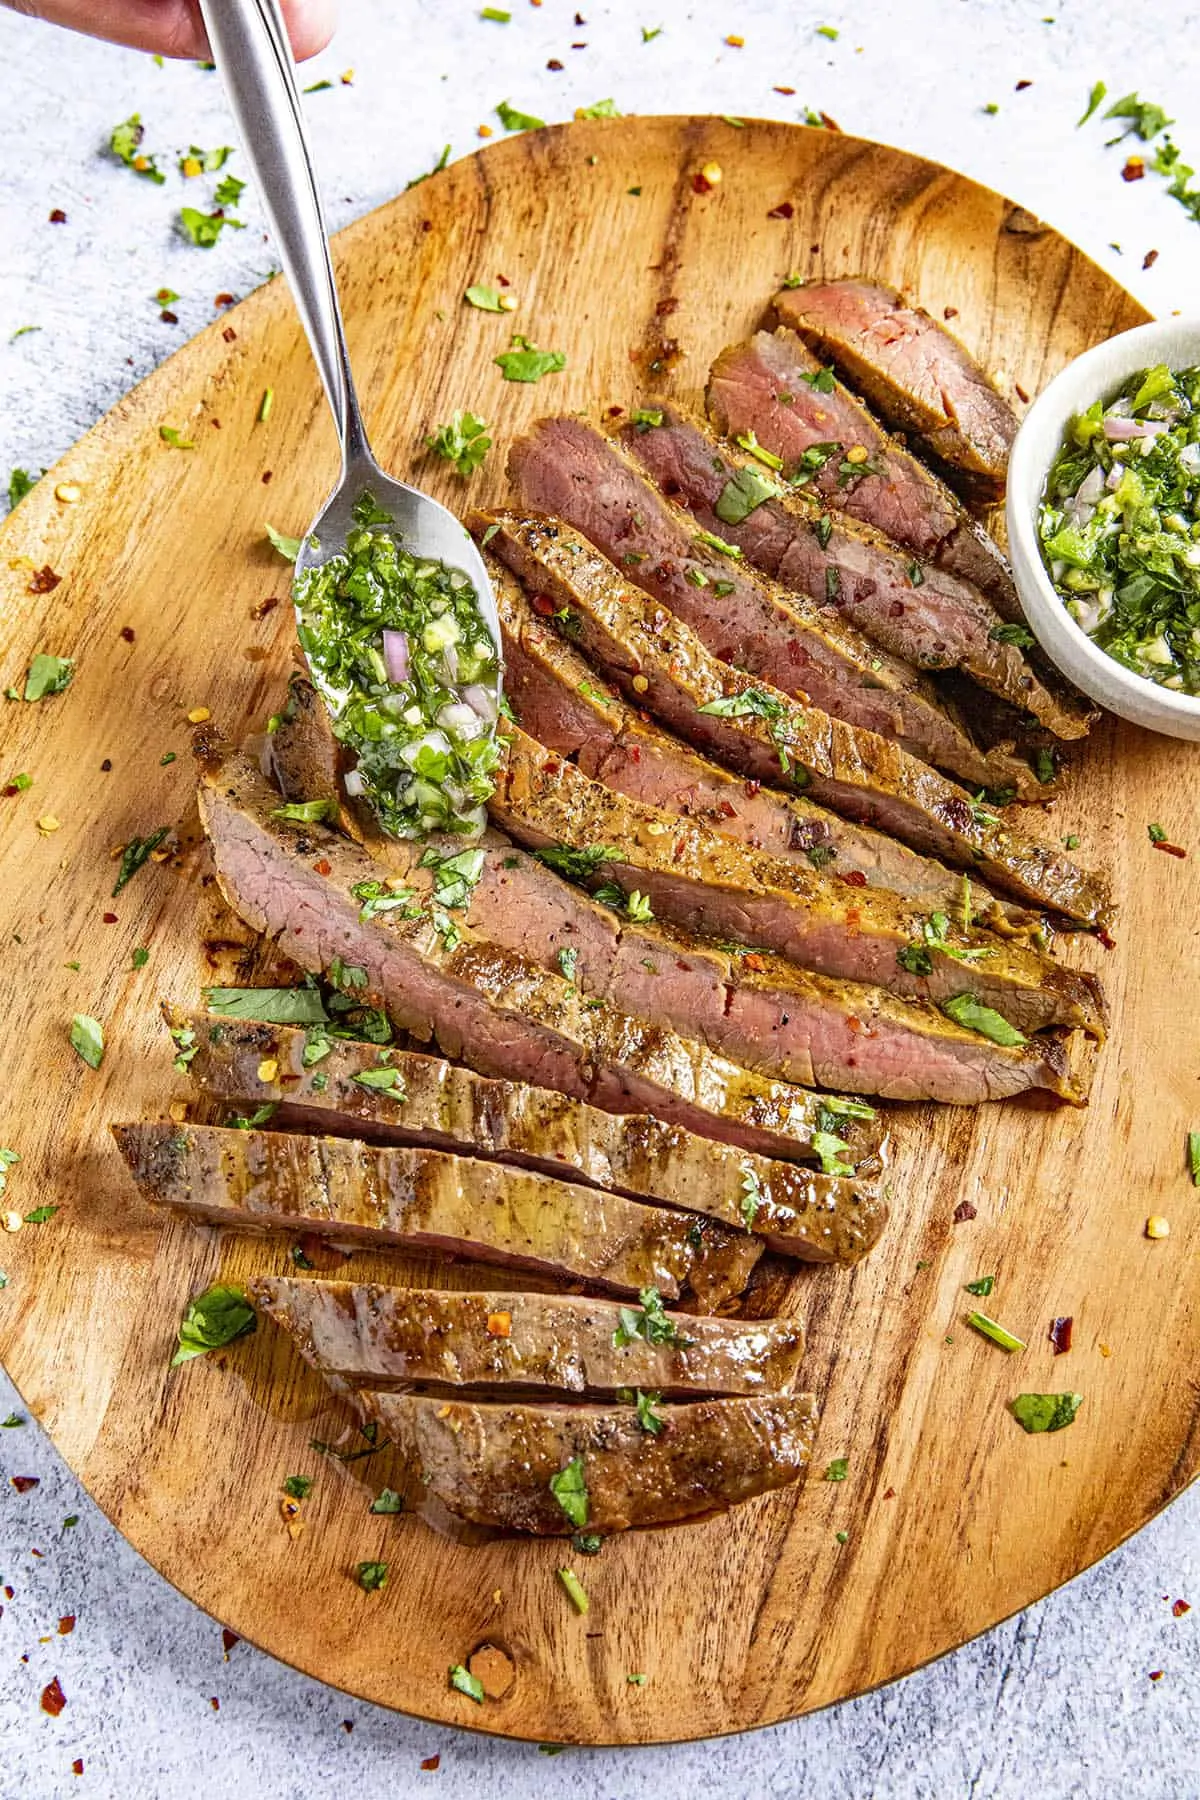 Mike spooning Chimichurri onto a sliced flank steak.